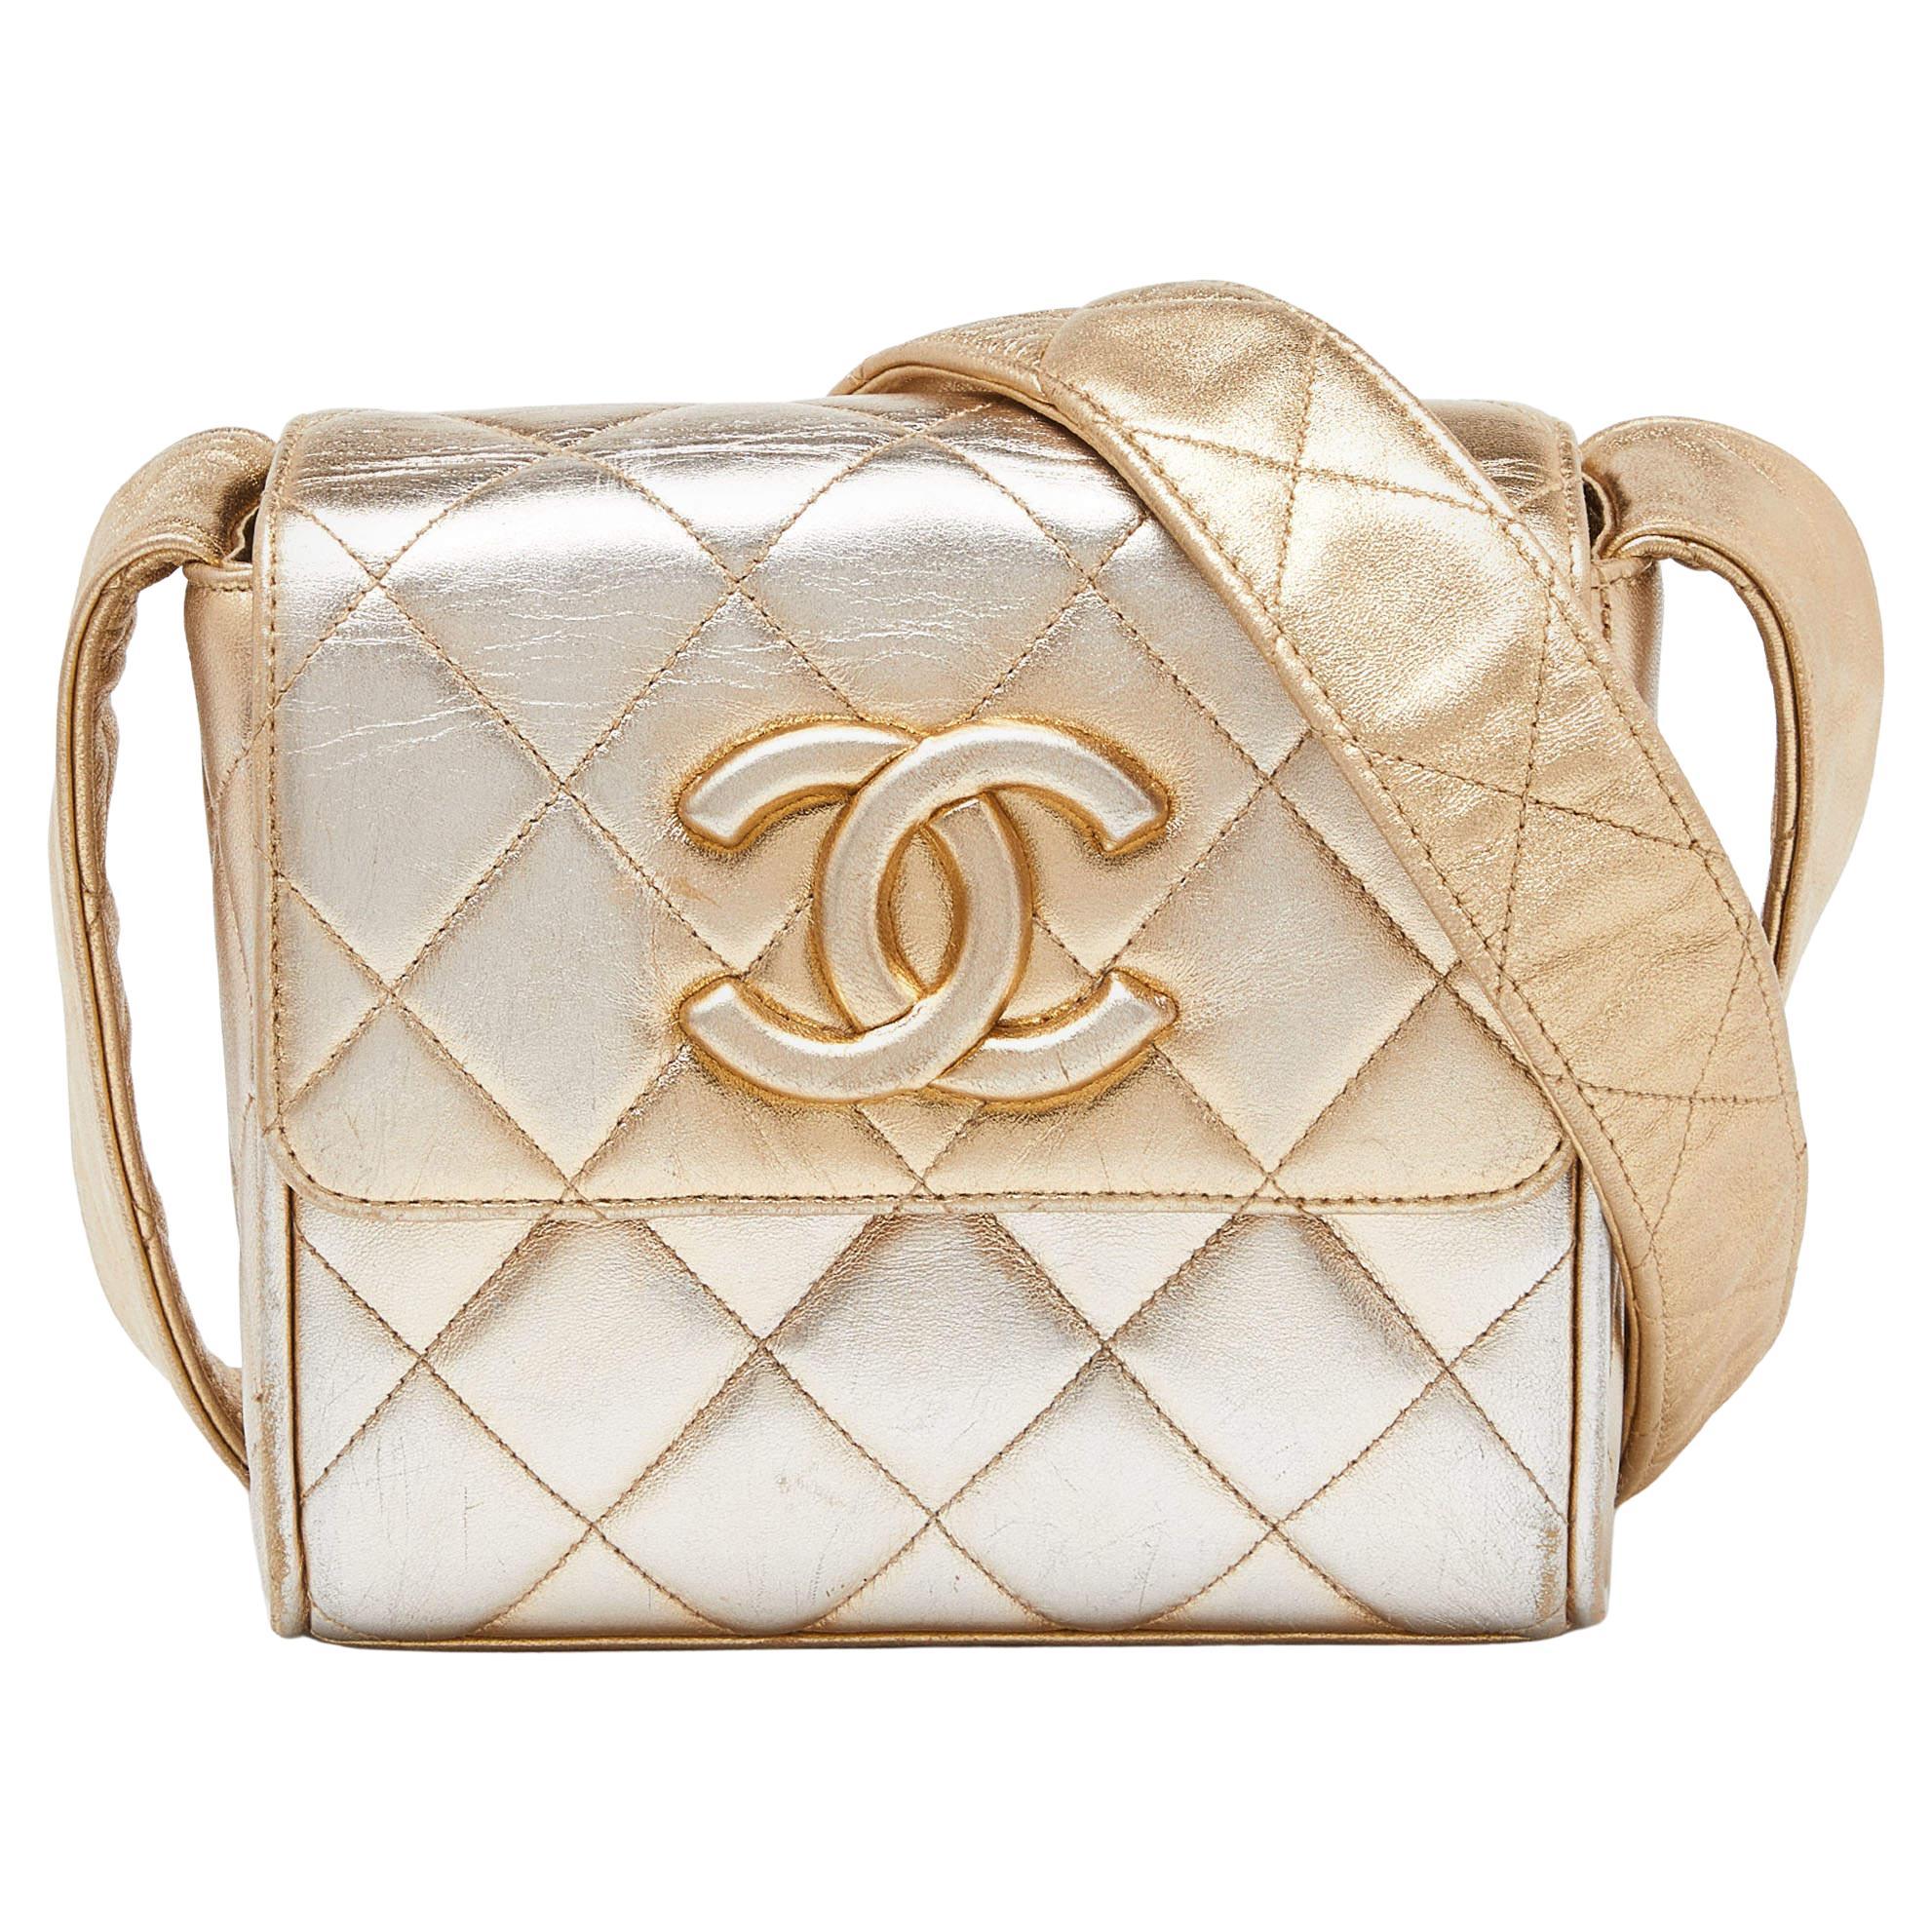 Chanel Gold Quilted Leather CC Flap Shoulder Bag For Sale